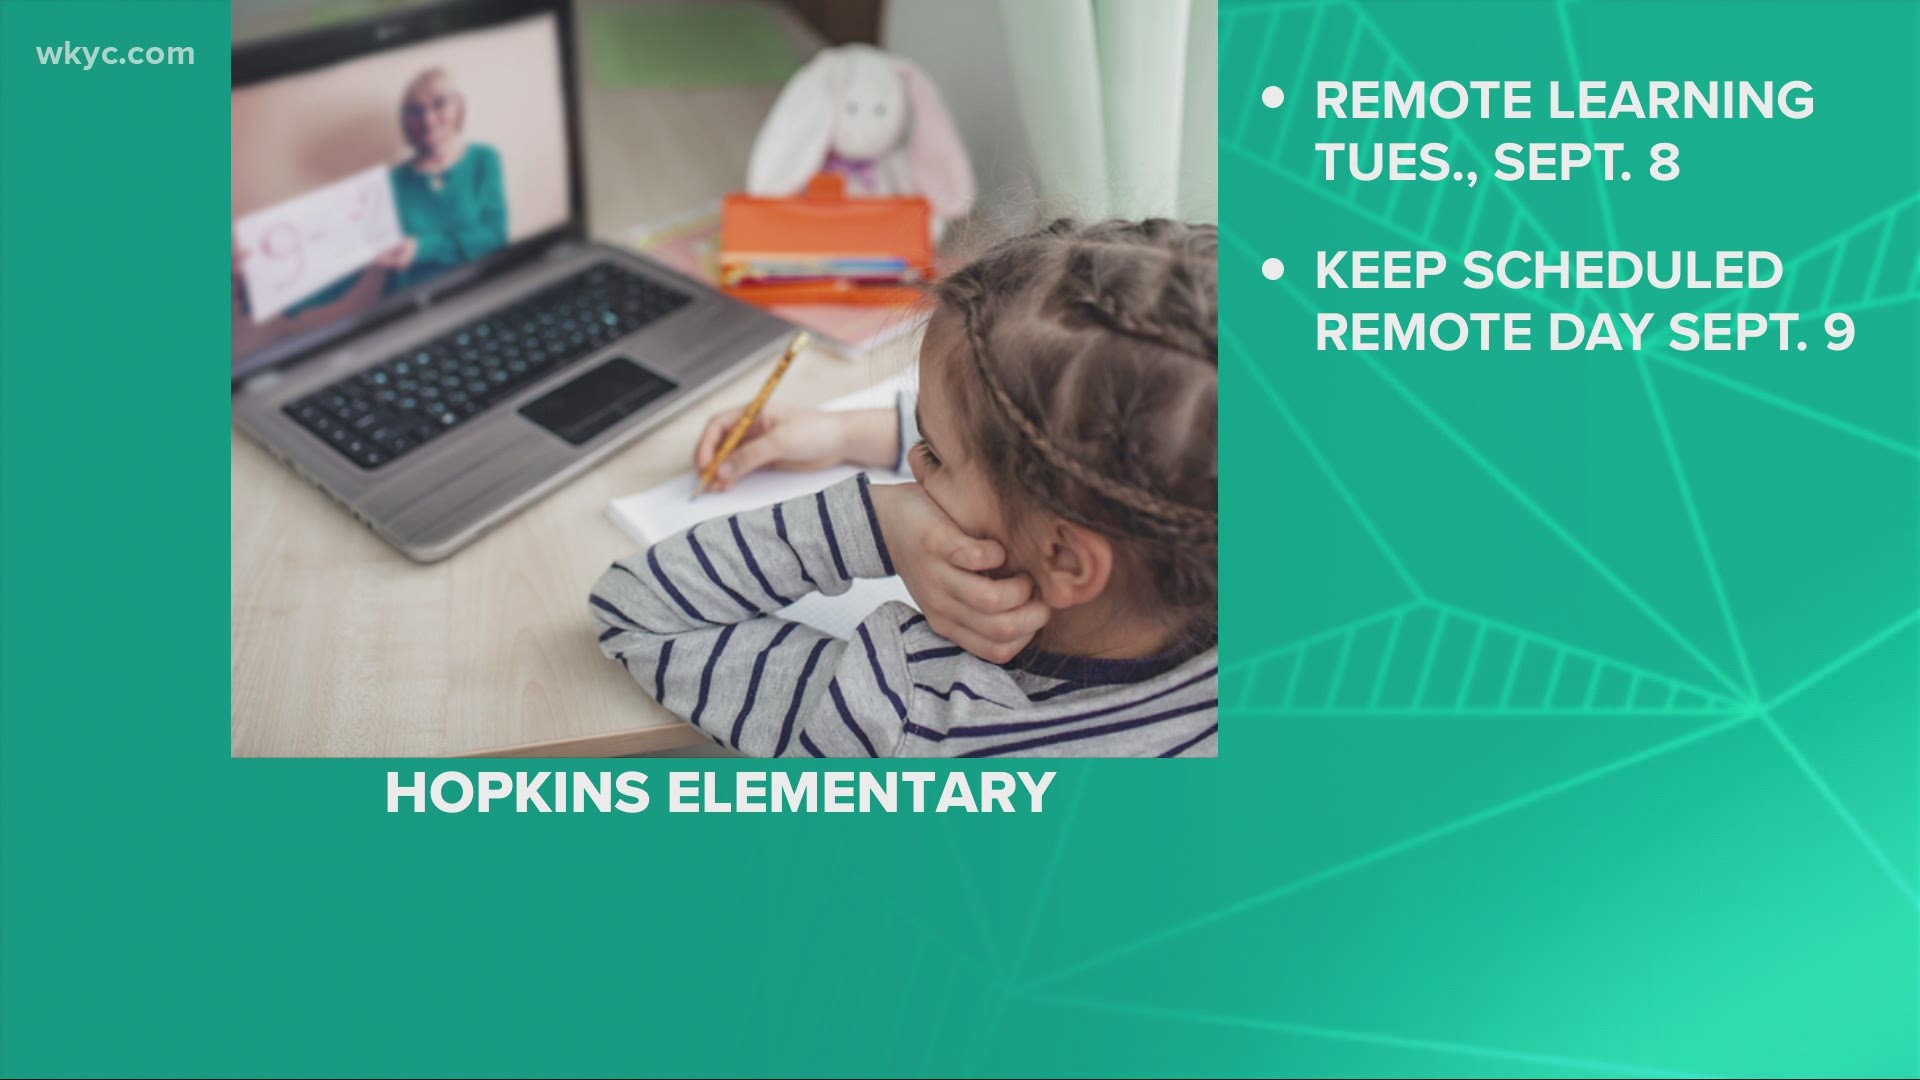 The principal and a teacher at Hopkins Elementary School in Mentor have tested positive for the Coronavirus. Classes will be held remotely Tuesday. and Wednesday.